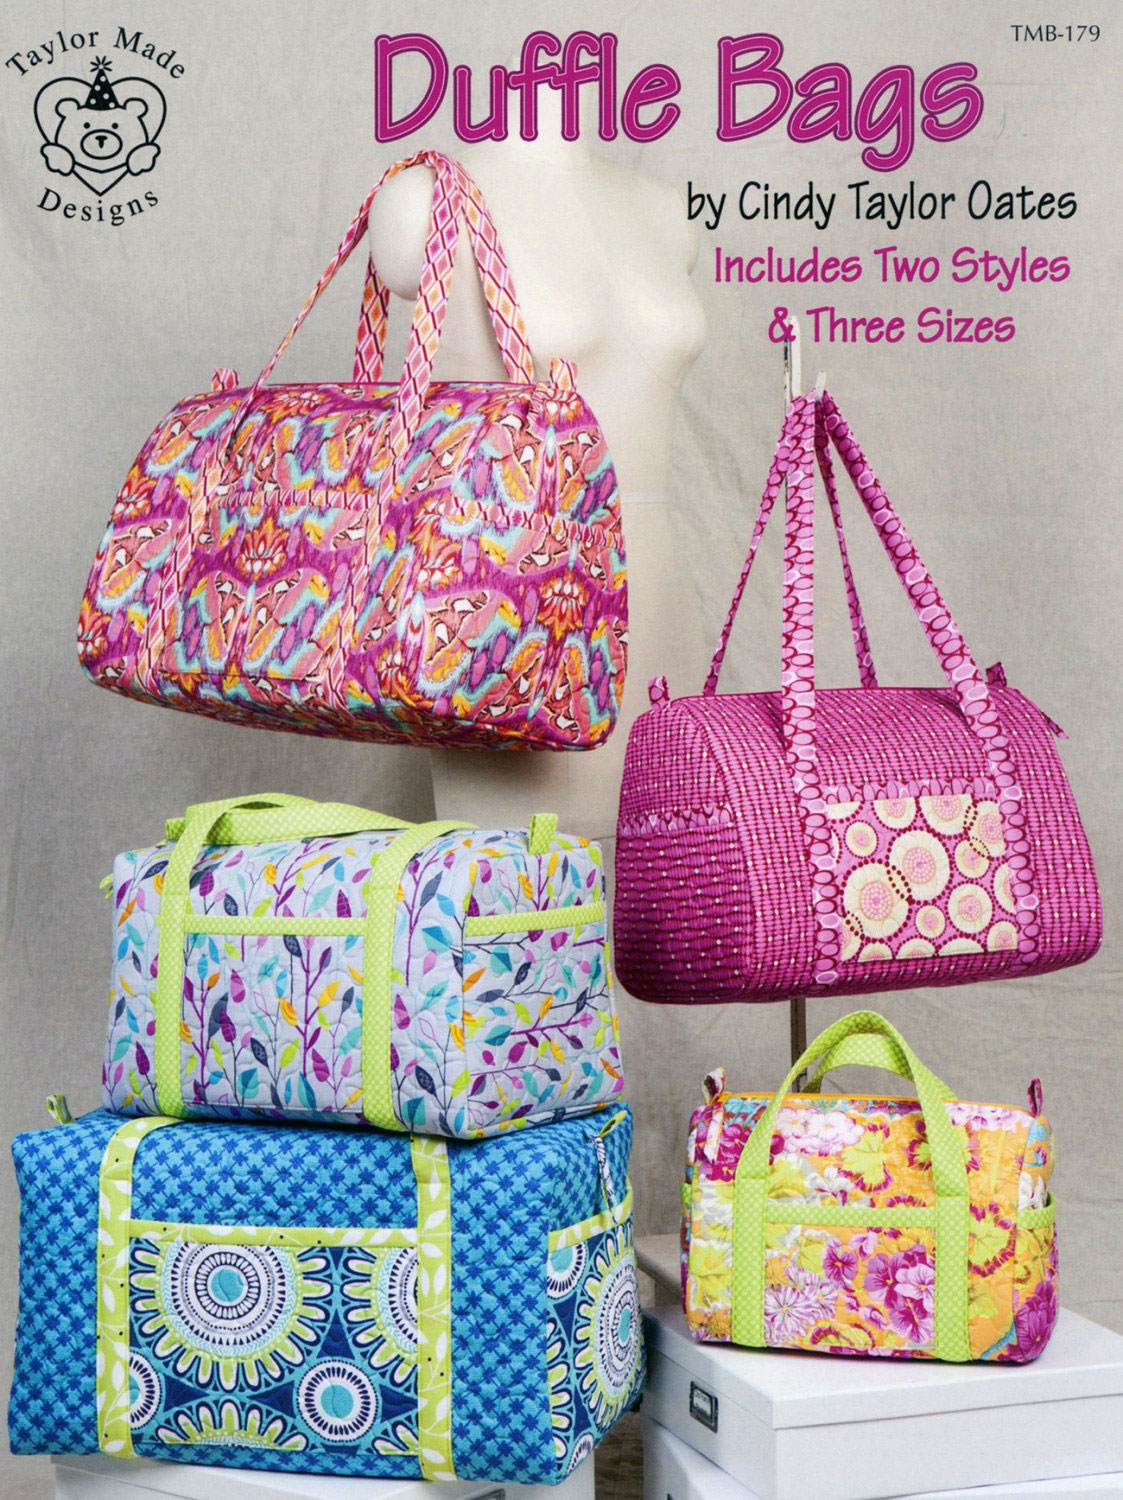 Duffle Bags sewing pattern book by Cindy Taylor Oates